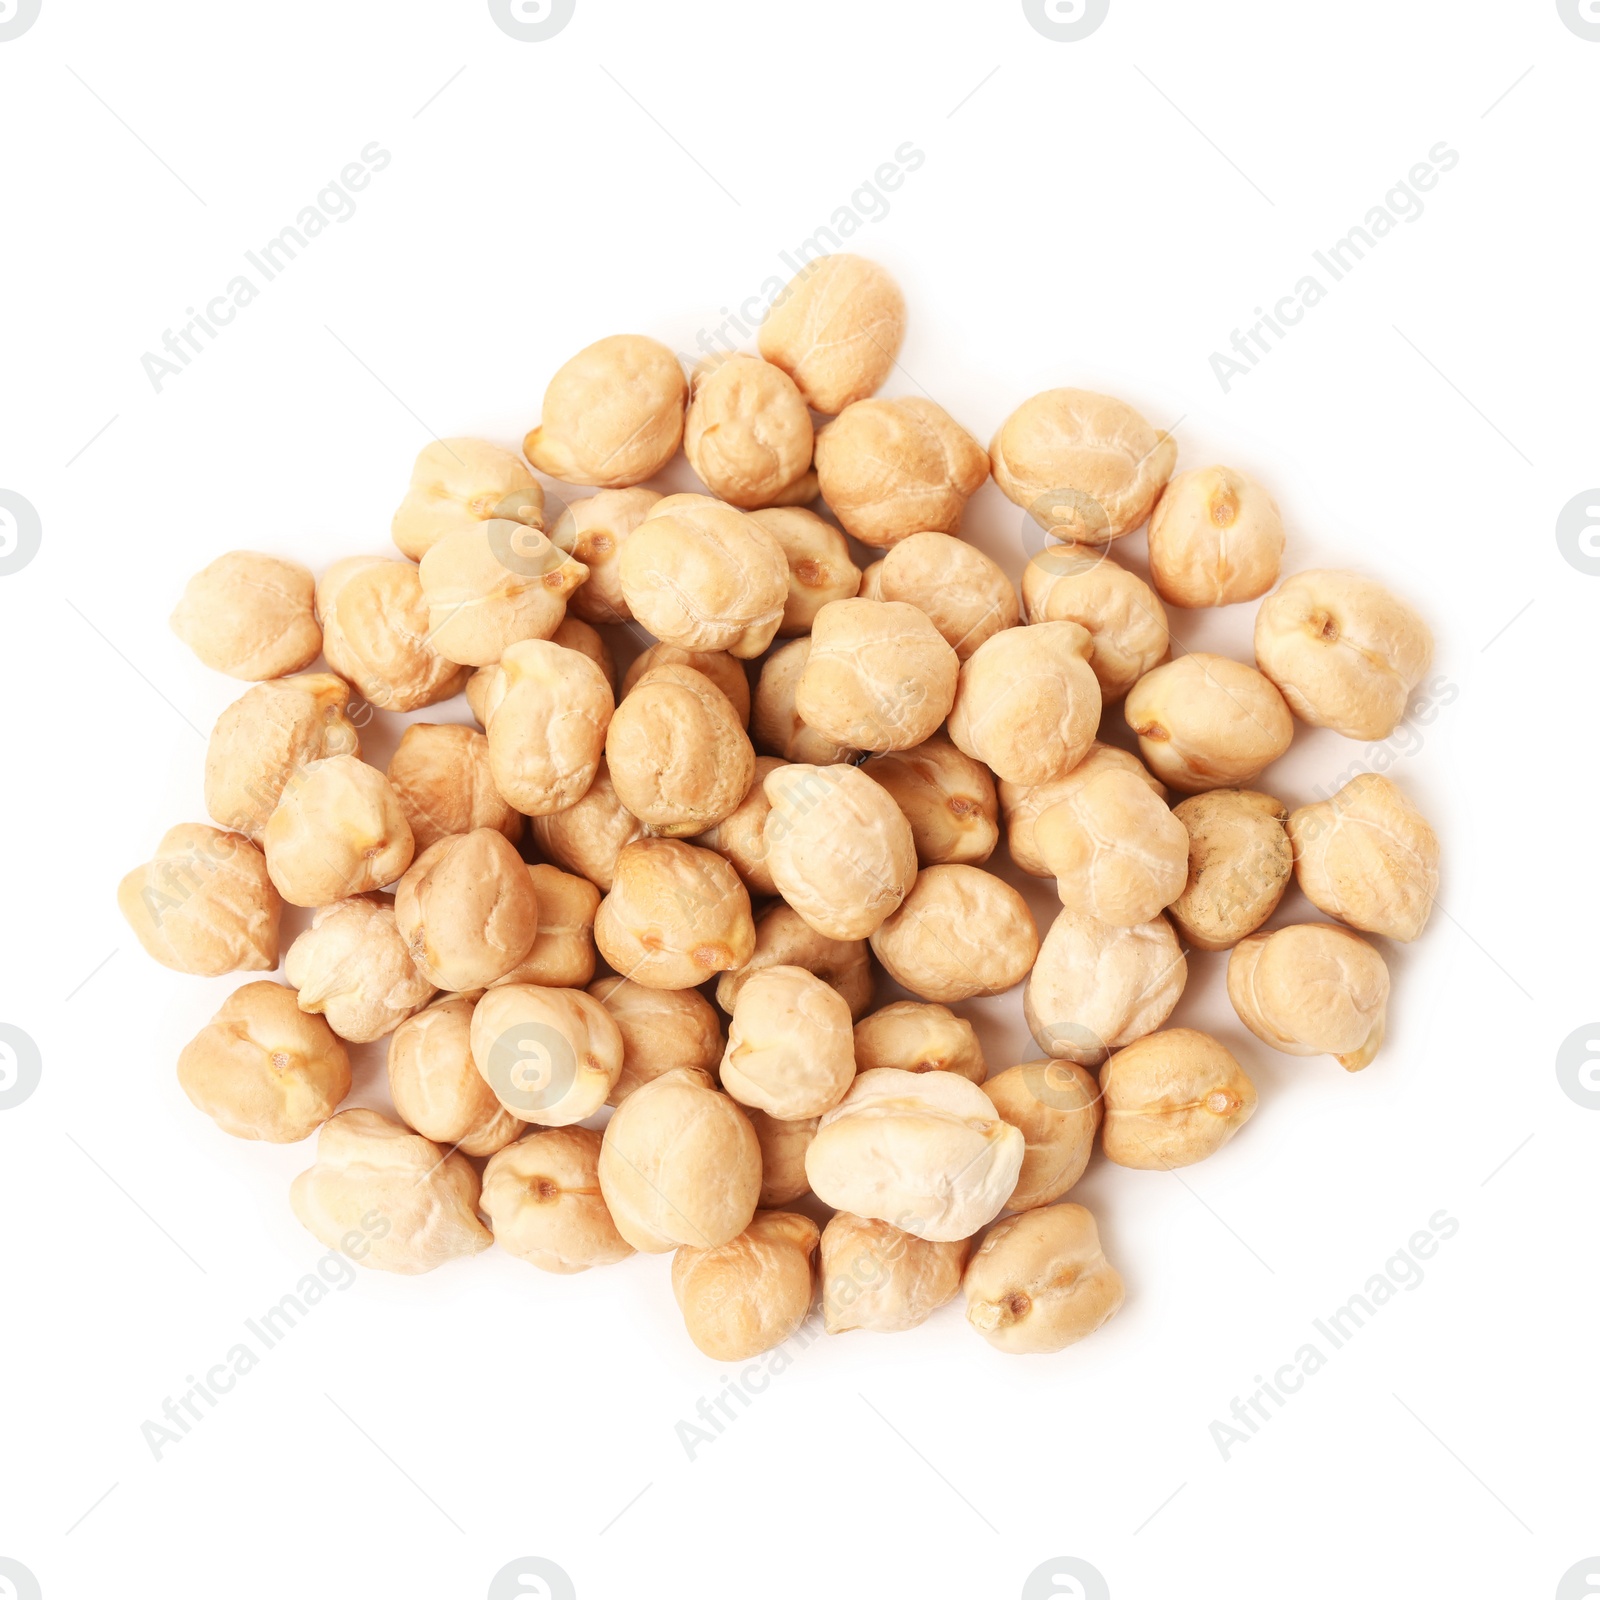 Photo of Pile of raw chickpeas on white background, top view. Vegetable planting